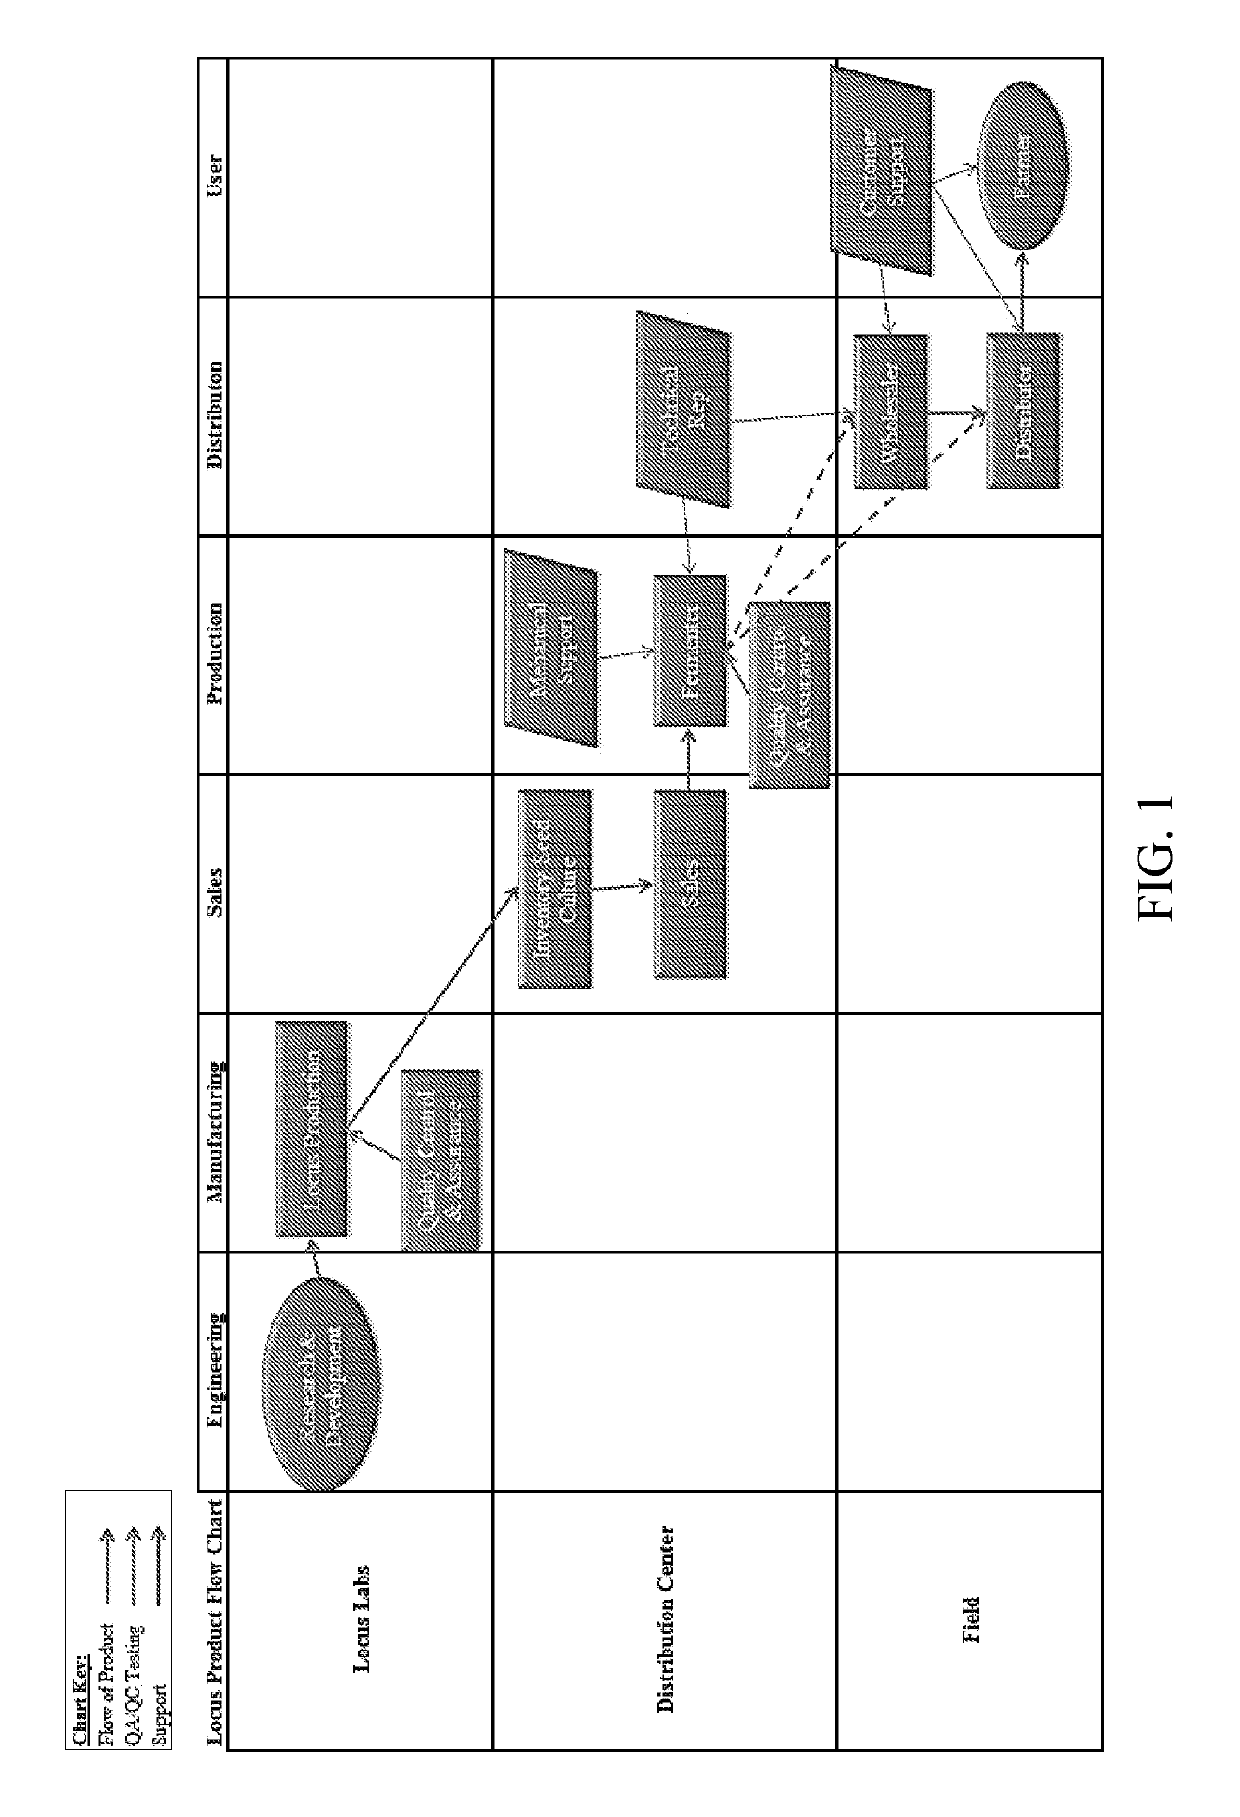 Distributed systems for the efficient production and use of microbe-based compositions